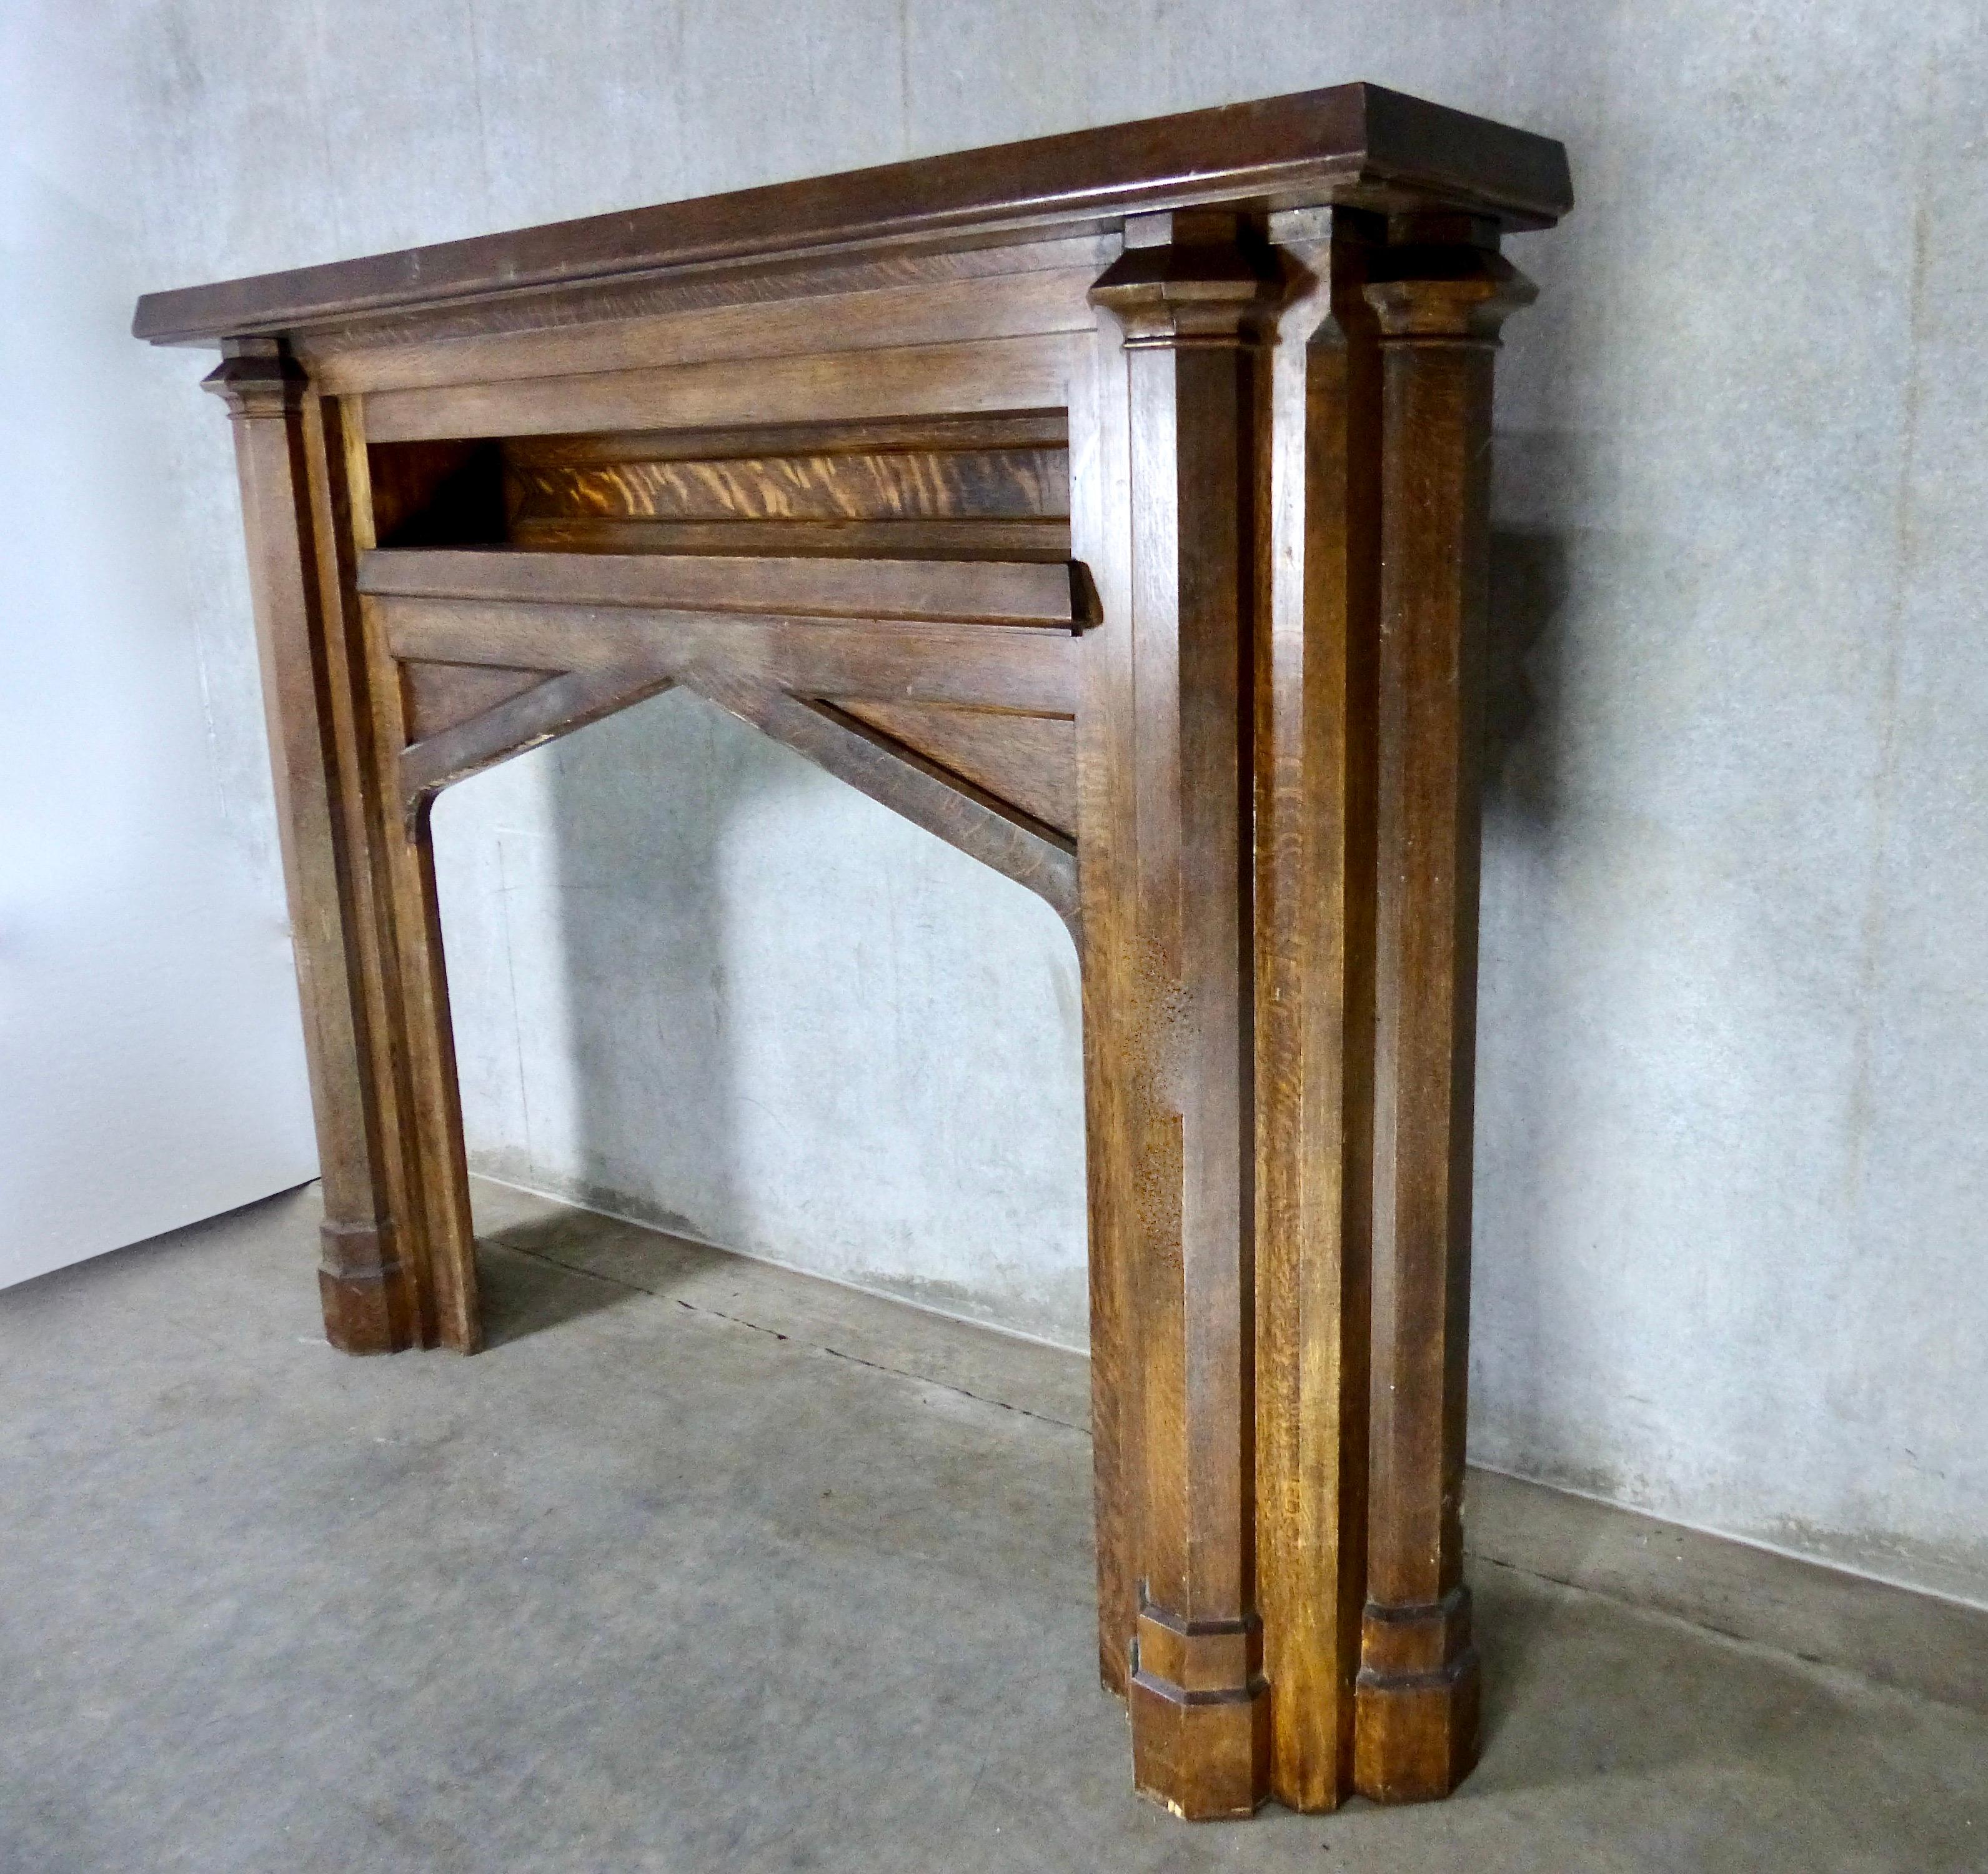 A monumental, solid oak fireplace mantel/surround salvaged from a mansion in Vancouver. Arts & Crafts/Tudor style, and in its original state, it features a small inset shelf, nicely sculpted and capped pillars, and an interior peak. This is a